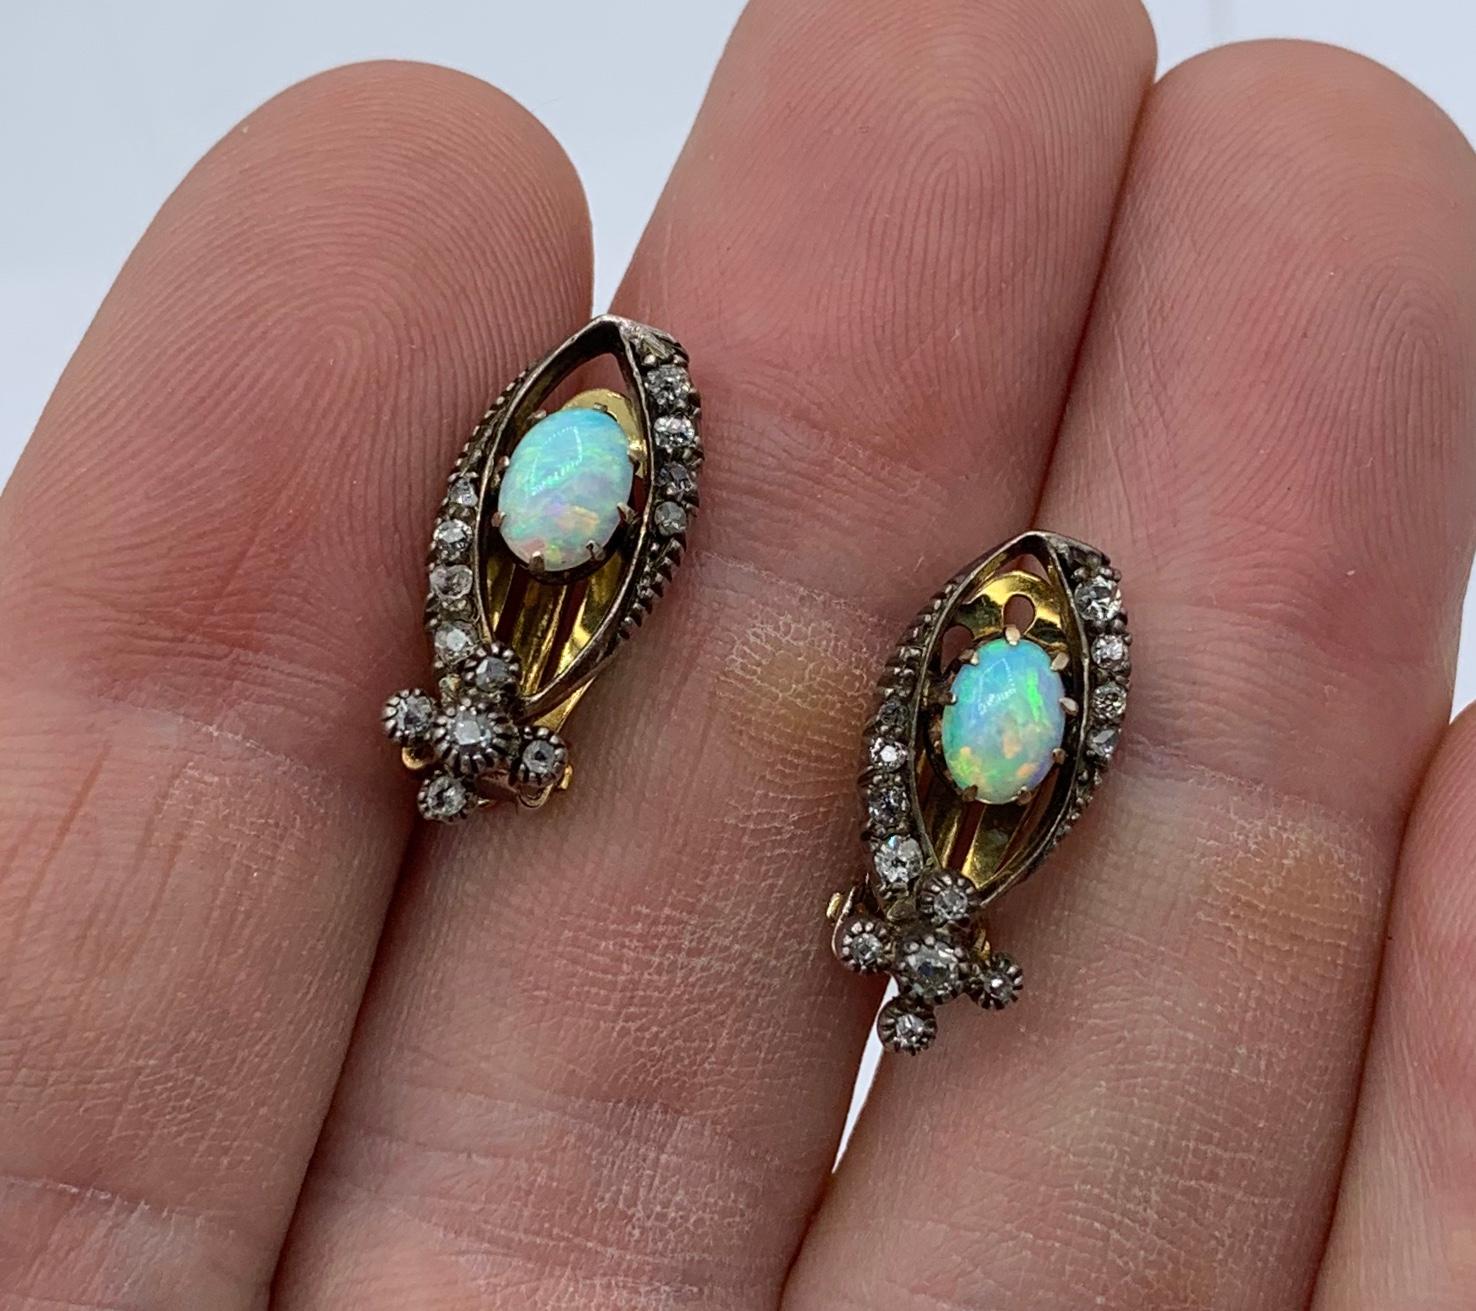 This is a gorgeous pair of antique Art Deco Opal Diamond Earrings with spectacular oval Opal cabochons of great beauty accented by sparkling white Old Mine Cut and Rose Cut Diamonds and set in 14 Karat Gold.  The colors in these Opals are absolutely